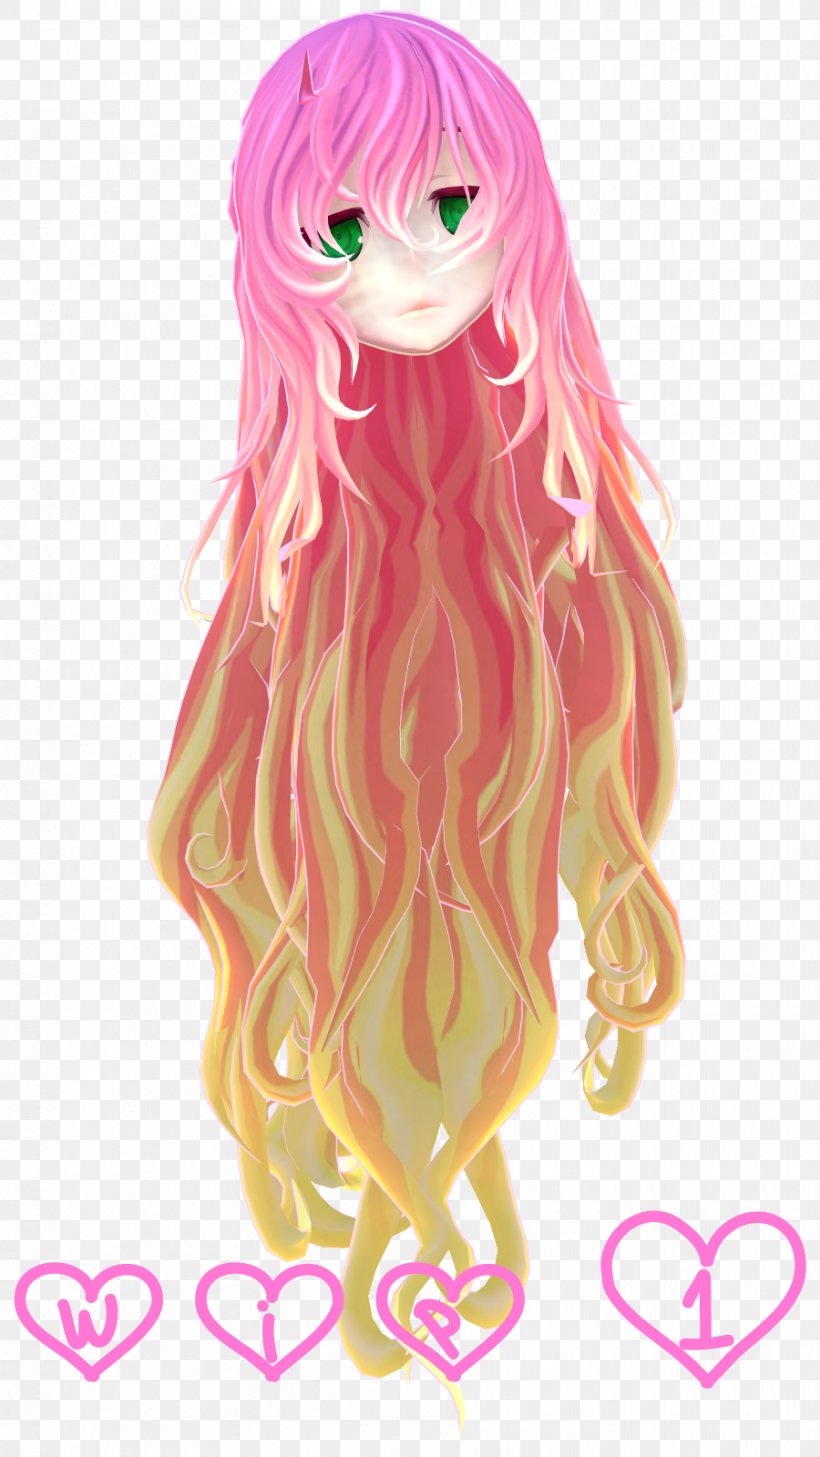 Illustration Cartoon Doll Long Hair Pink M, PNG, 900x1600px, Cartoon, Character, Doll, Fiction, Fictional Character Download Free